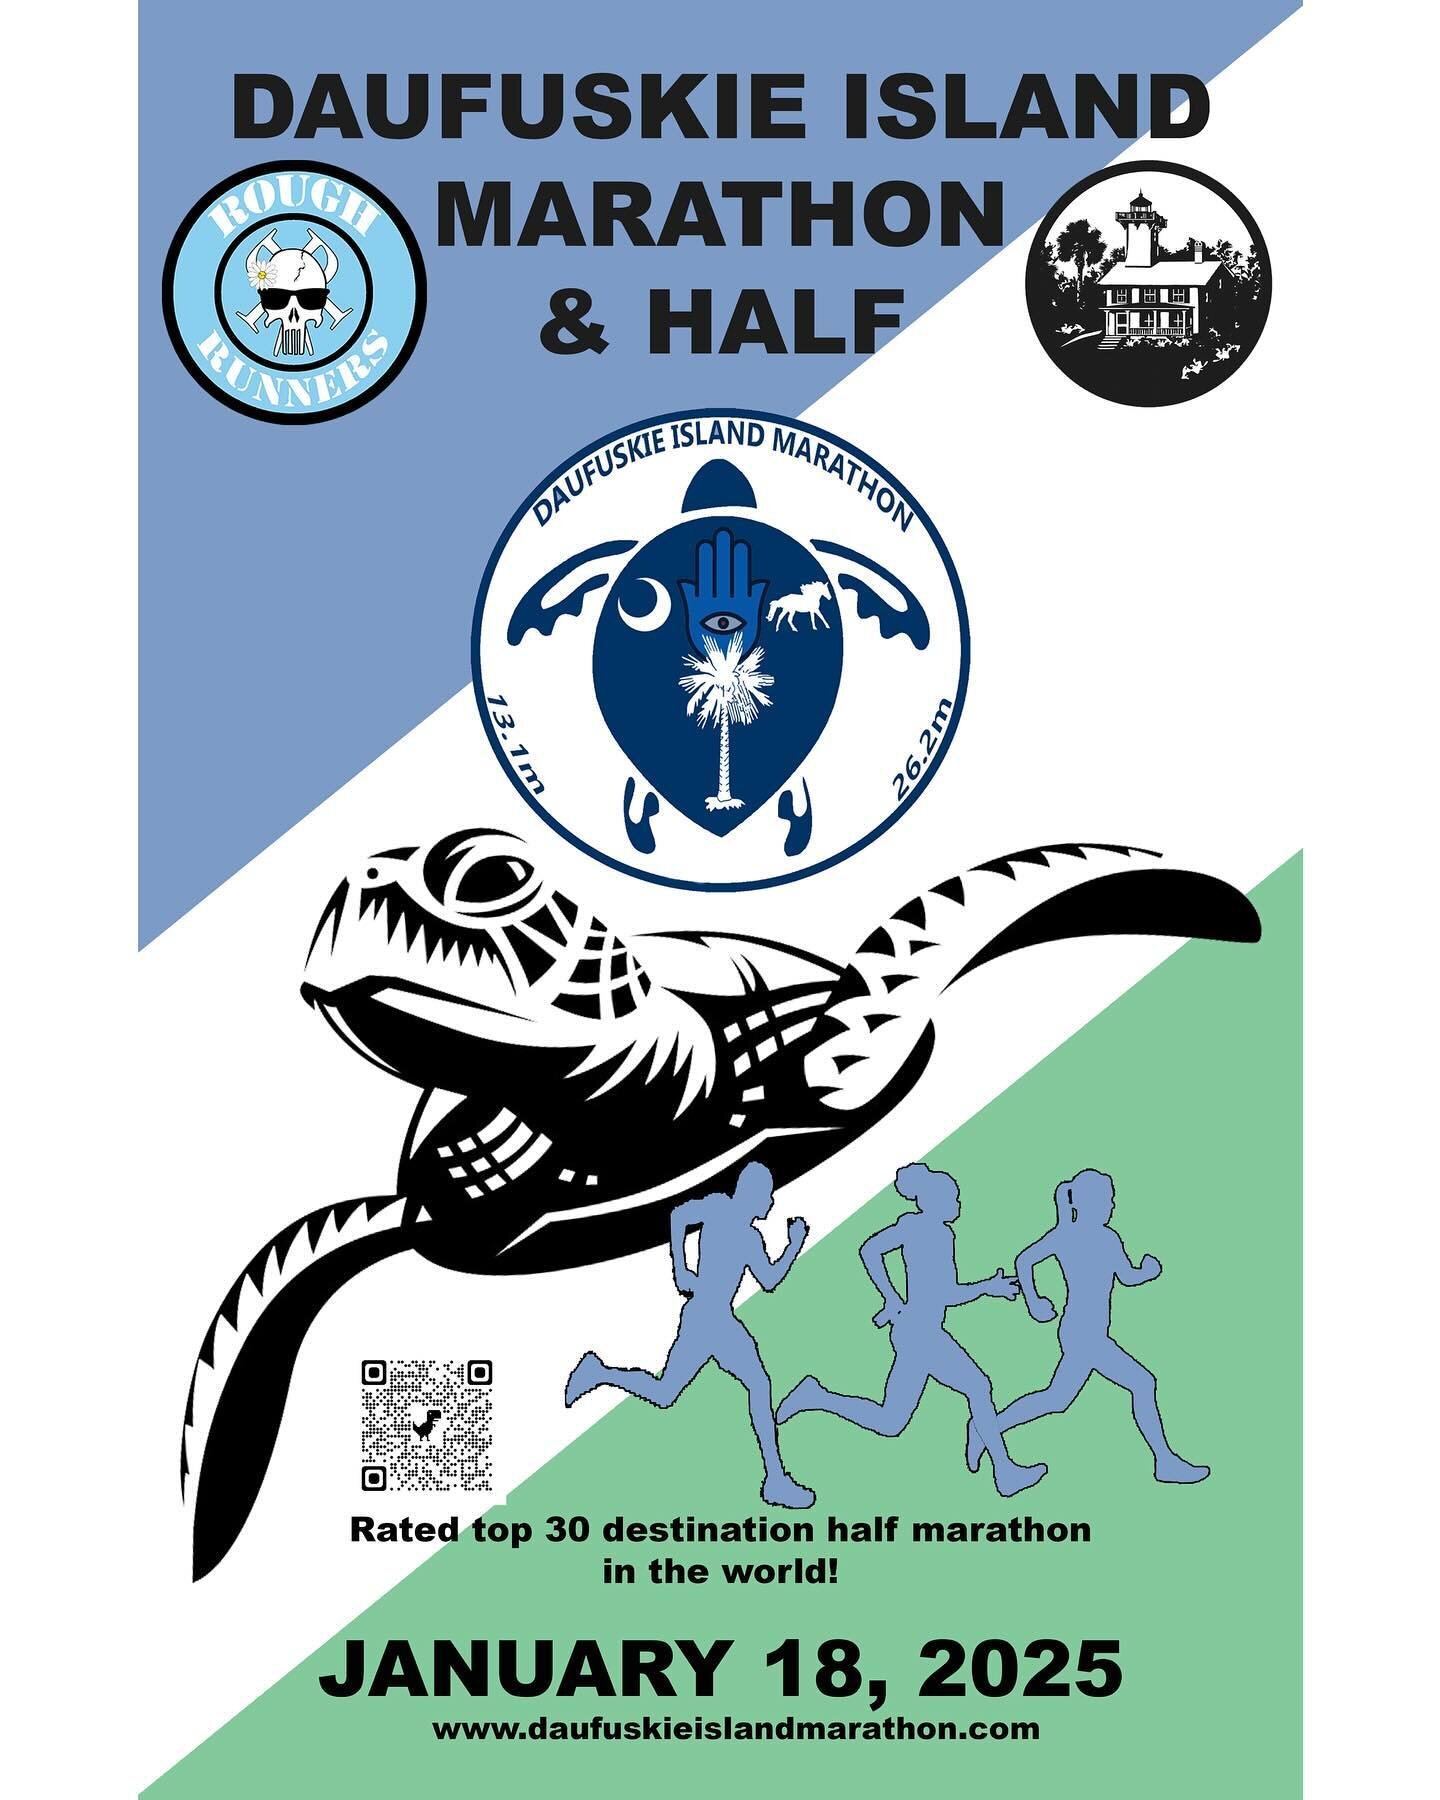 Start planning and training for 2025 Daufuskie Island Marathon and Half!
Rated in the top 30 destination Half marathons in the world! Run through beautiful, eclectic Daufuskie Island, the gem of the south! It&rsquo;s a flat, fast course and Boston qu